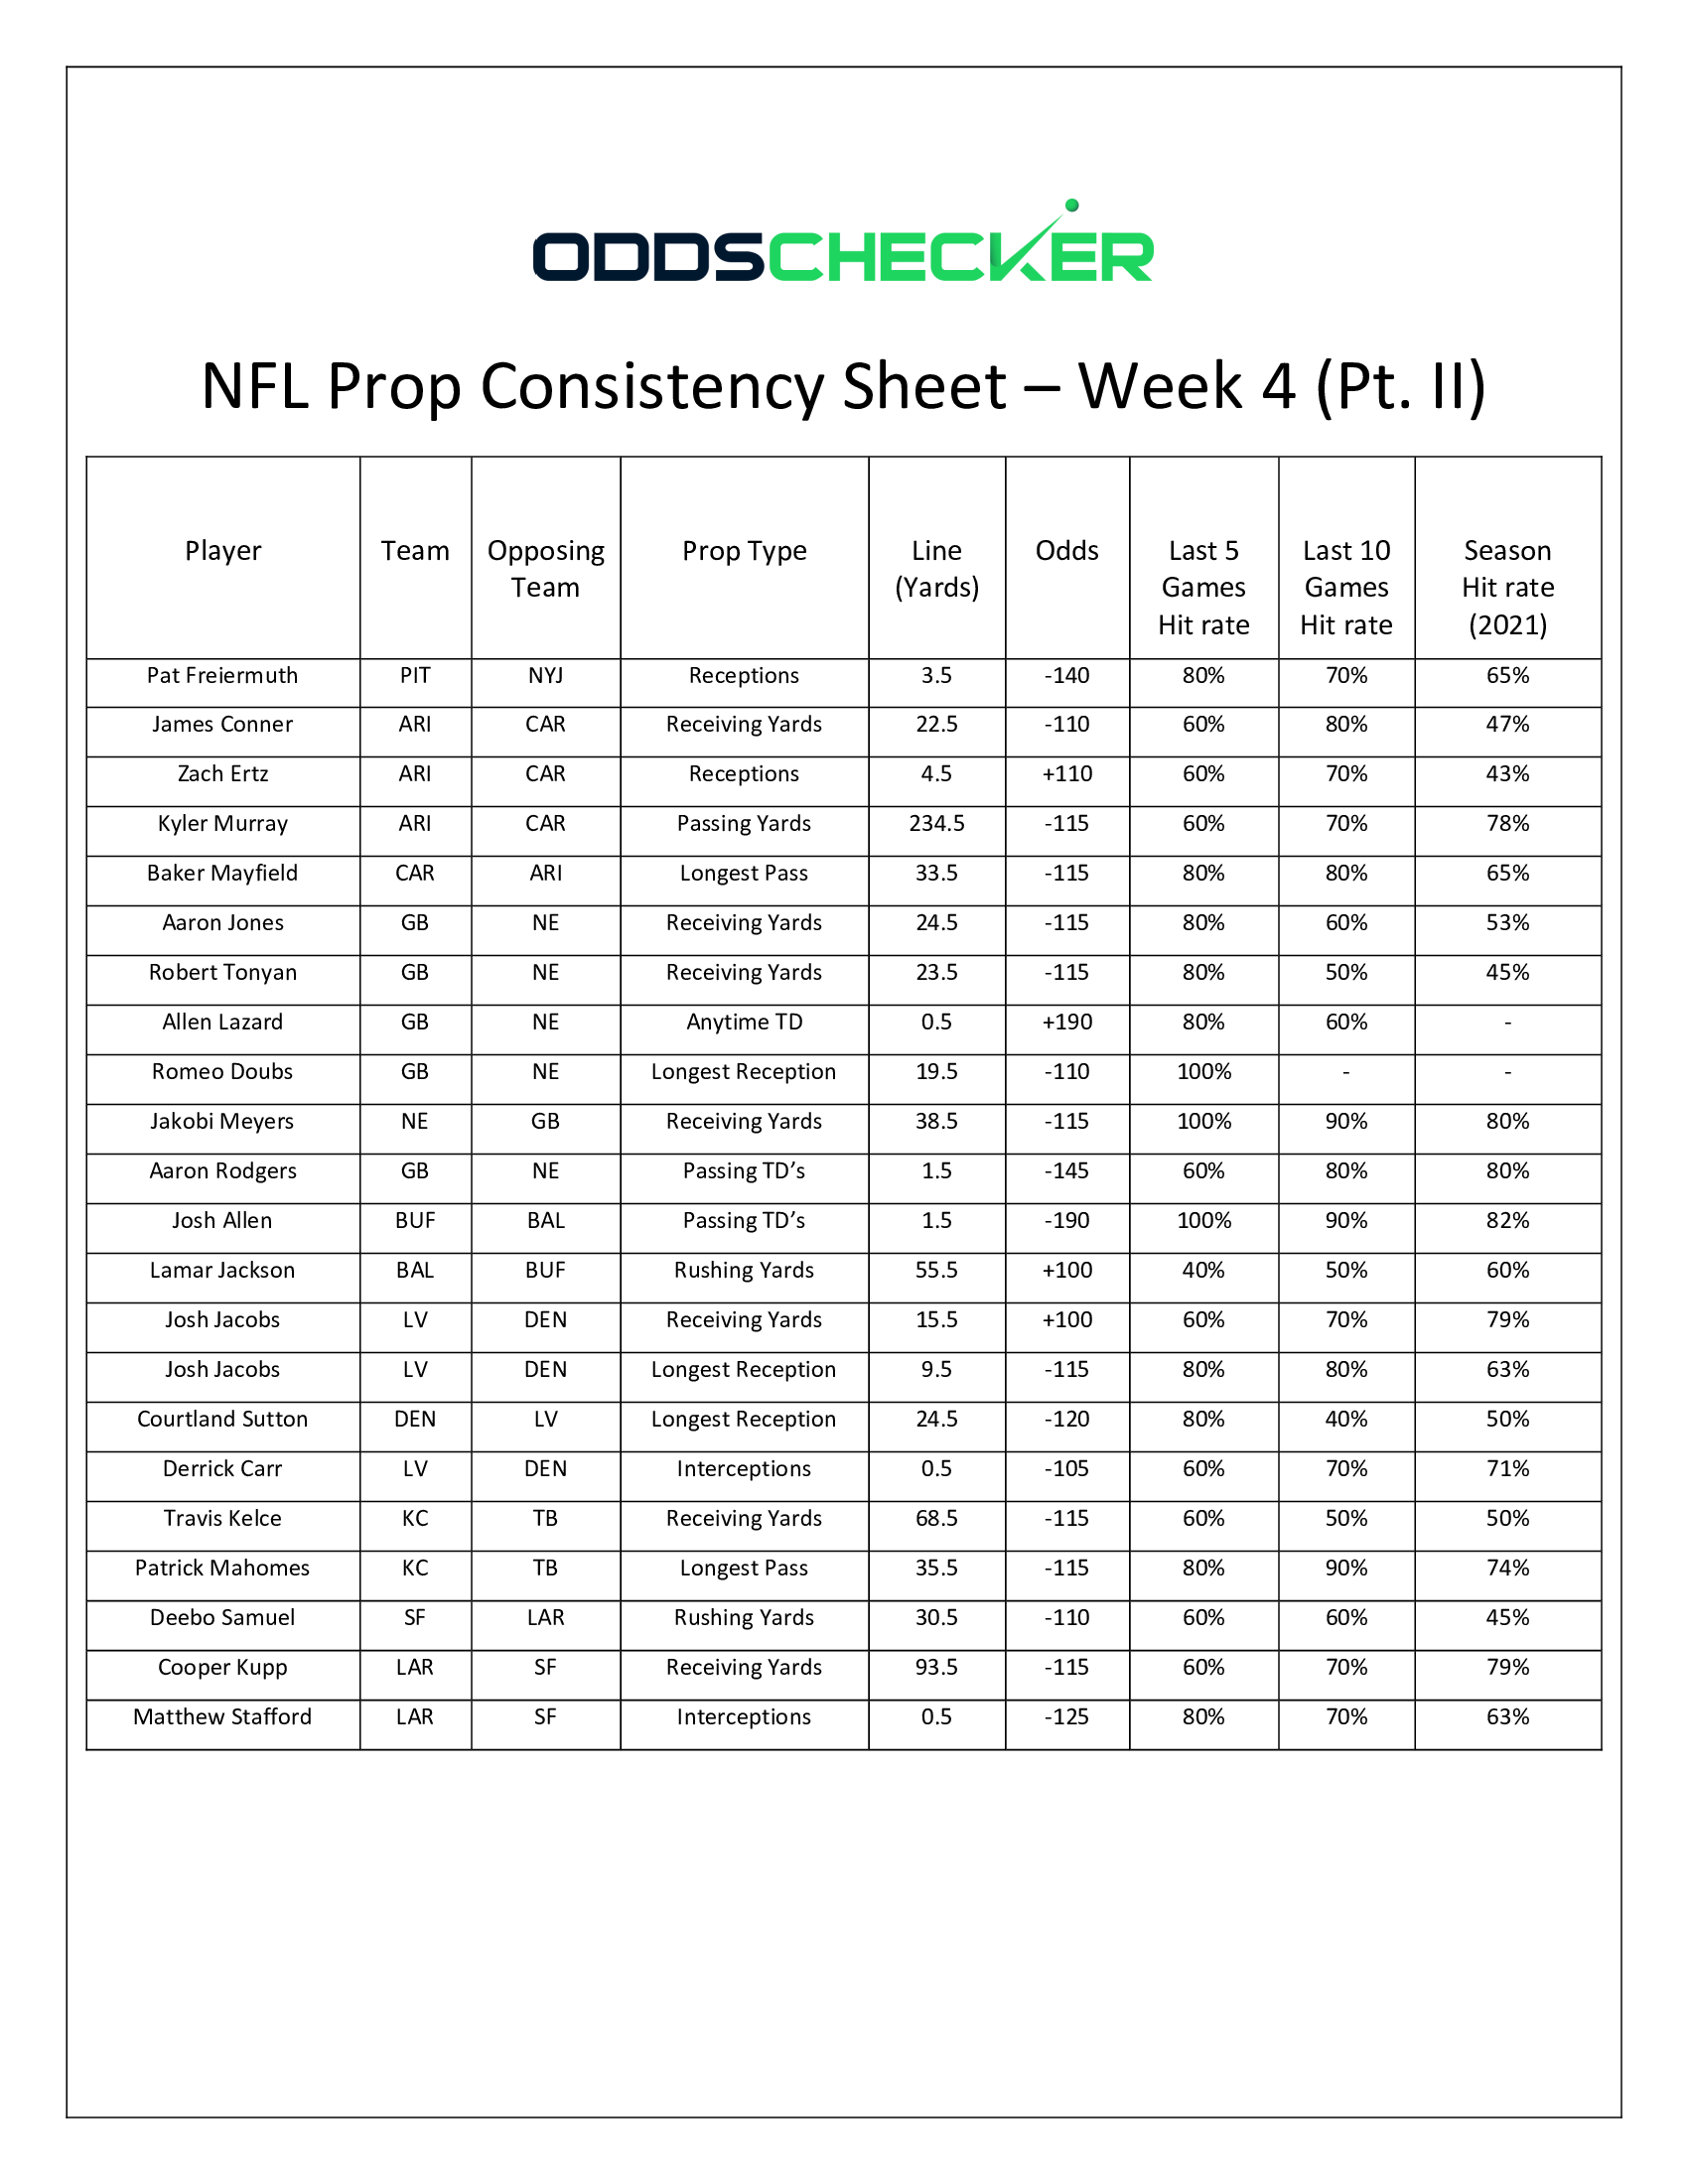 Best NFL Prop Bets for 4 PM Games in Week 4